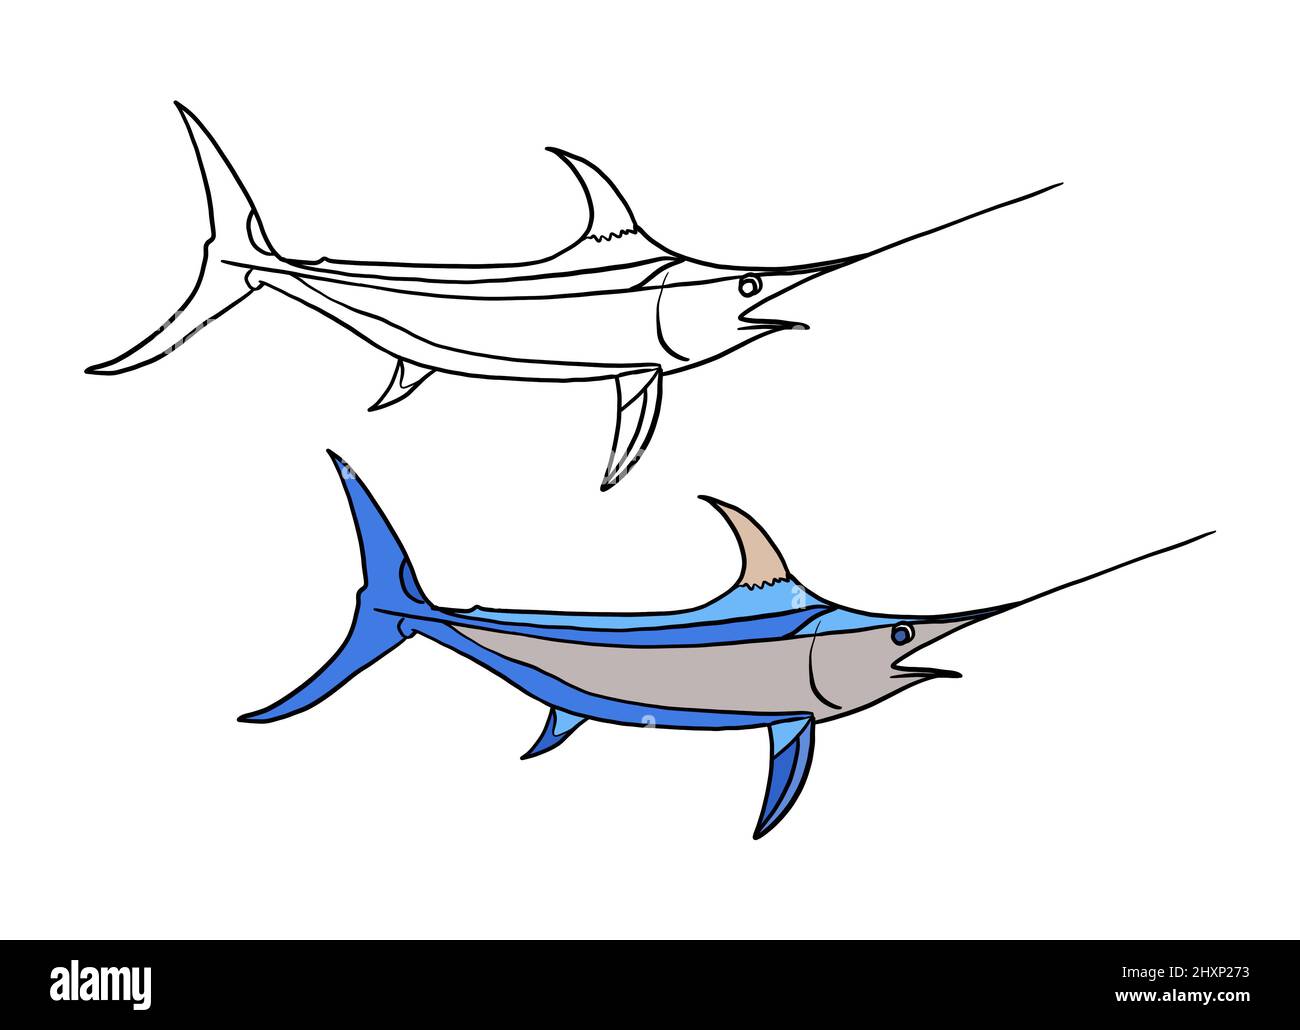 Illustration for a coloring book in color and black and white. Drawing of a swordfish on a white isolated background. High quality illustration Stock Photo